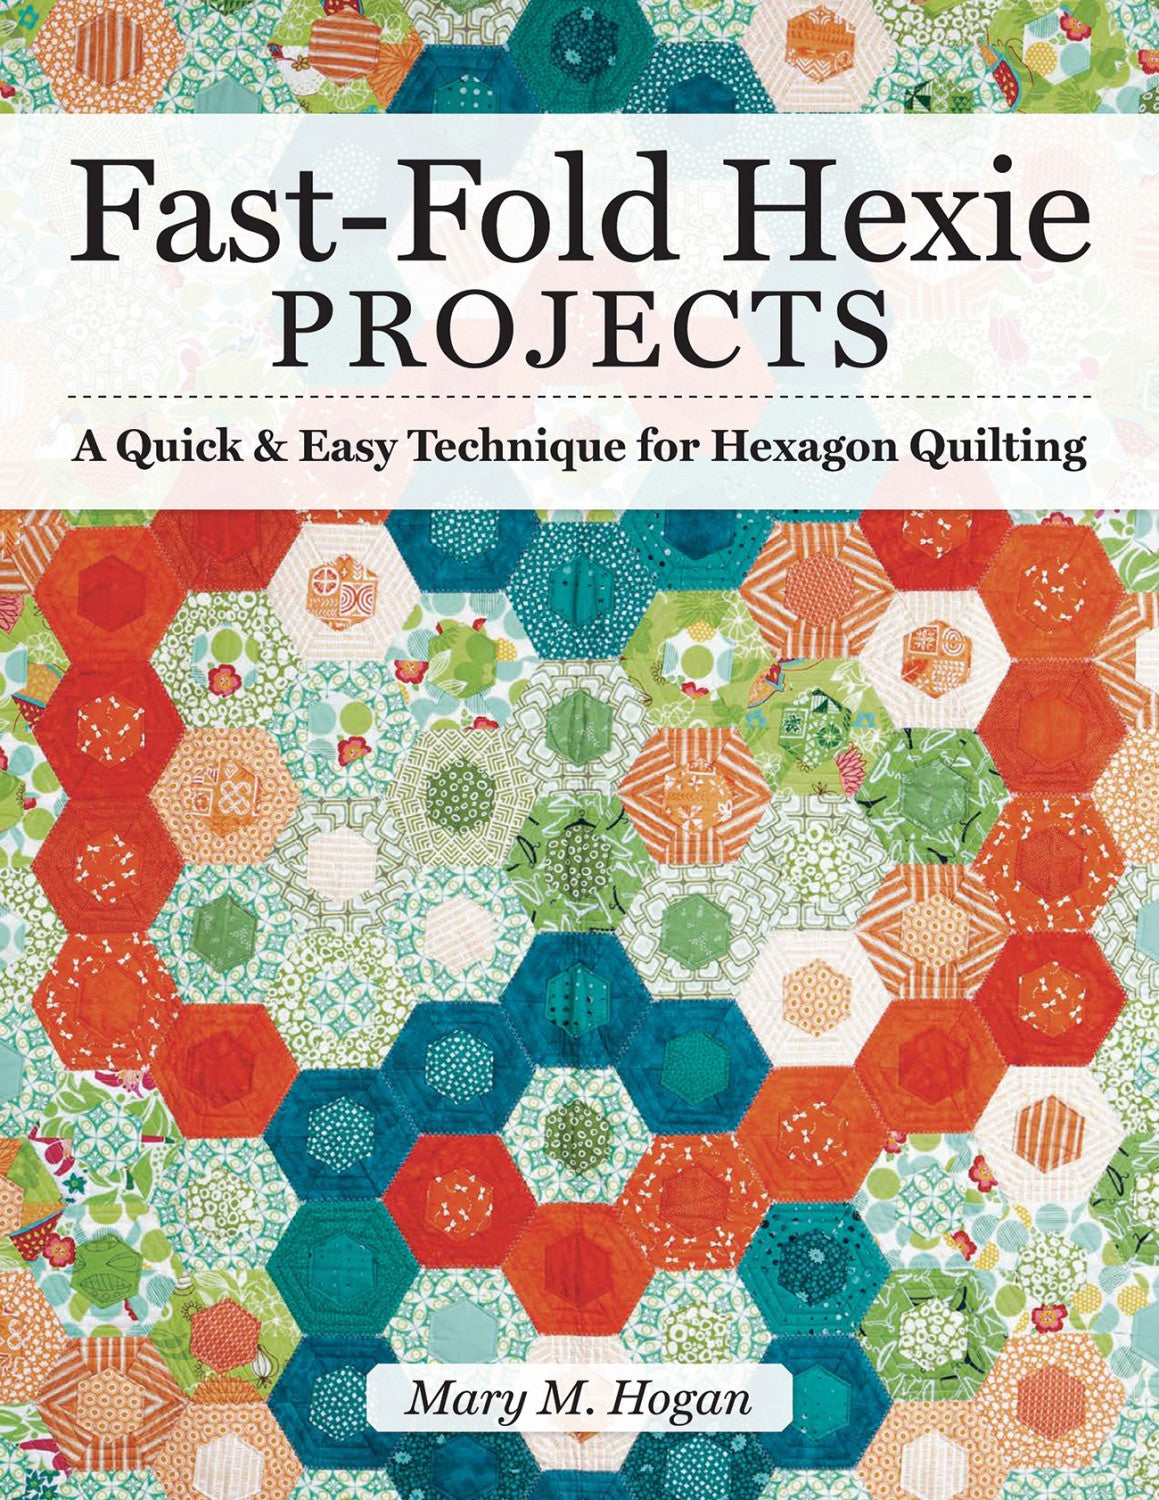 Fast-Fold Hexie Quilting by Mary M Hogan